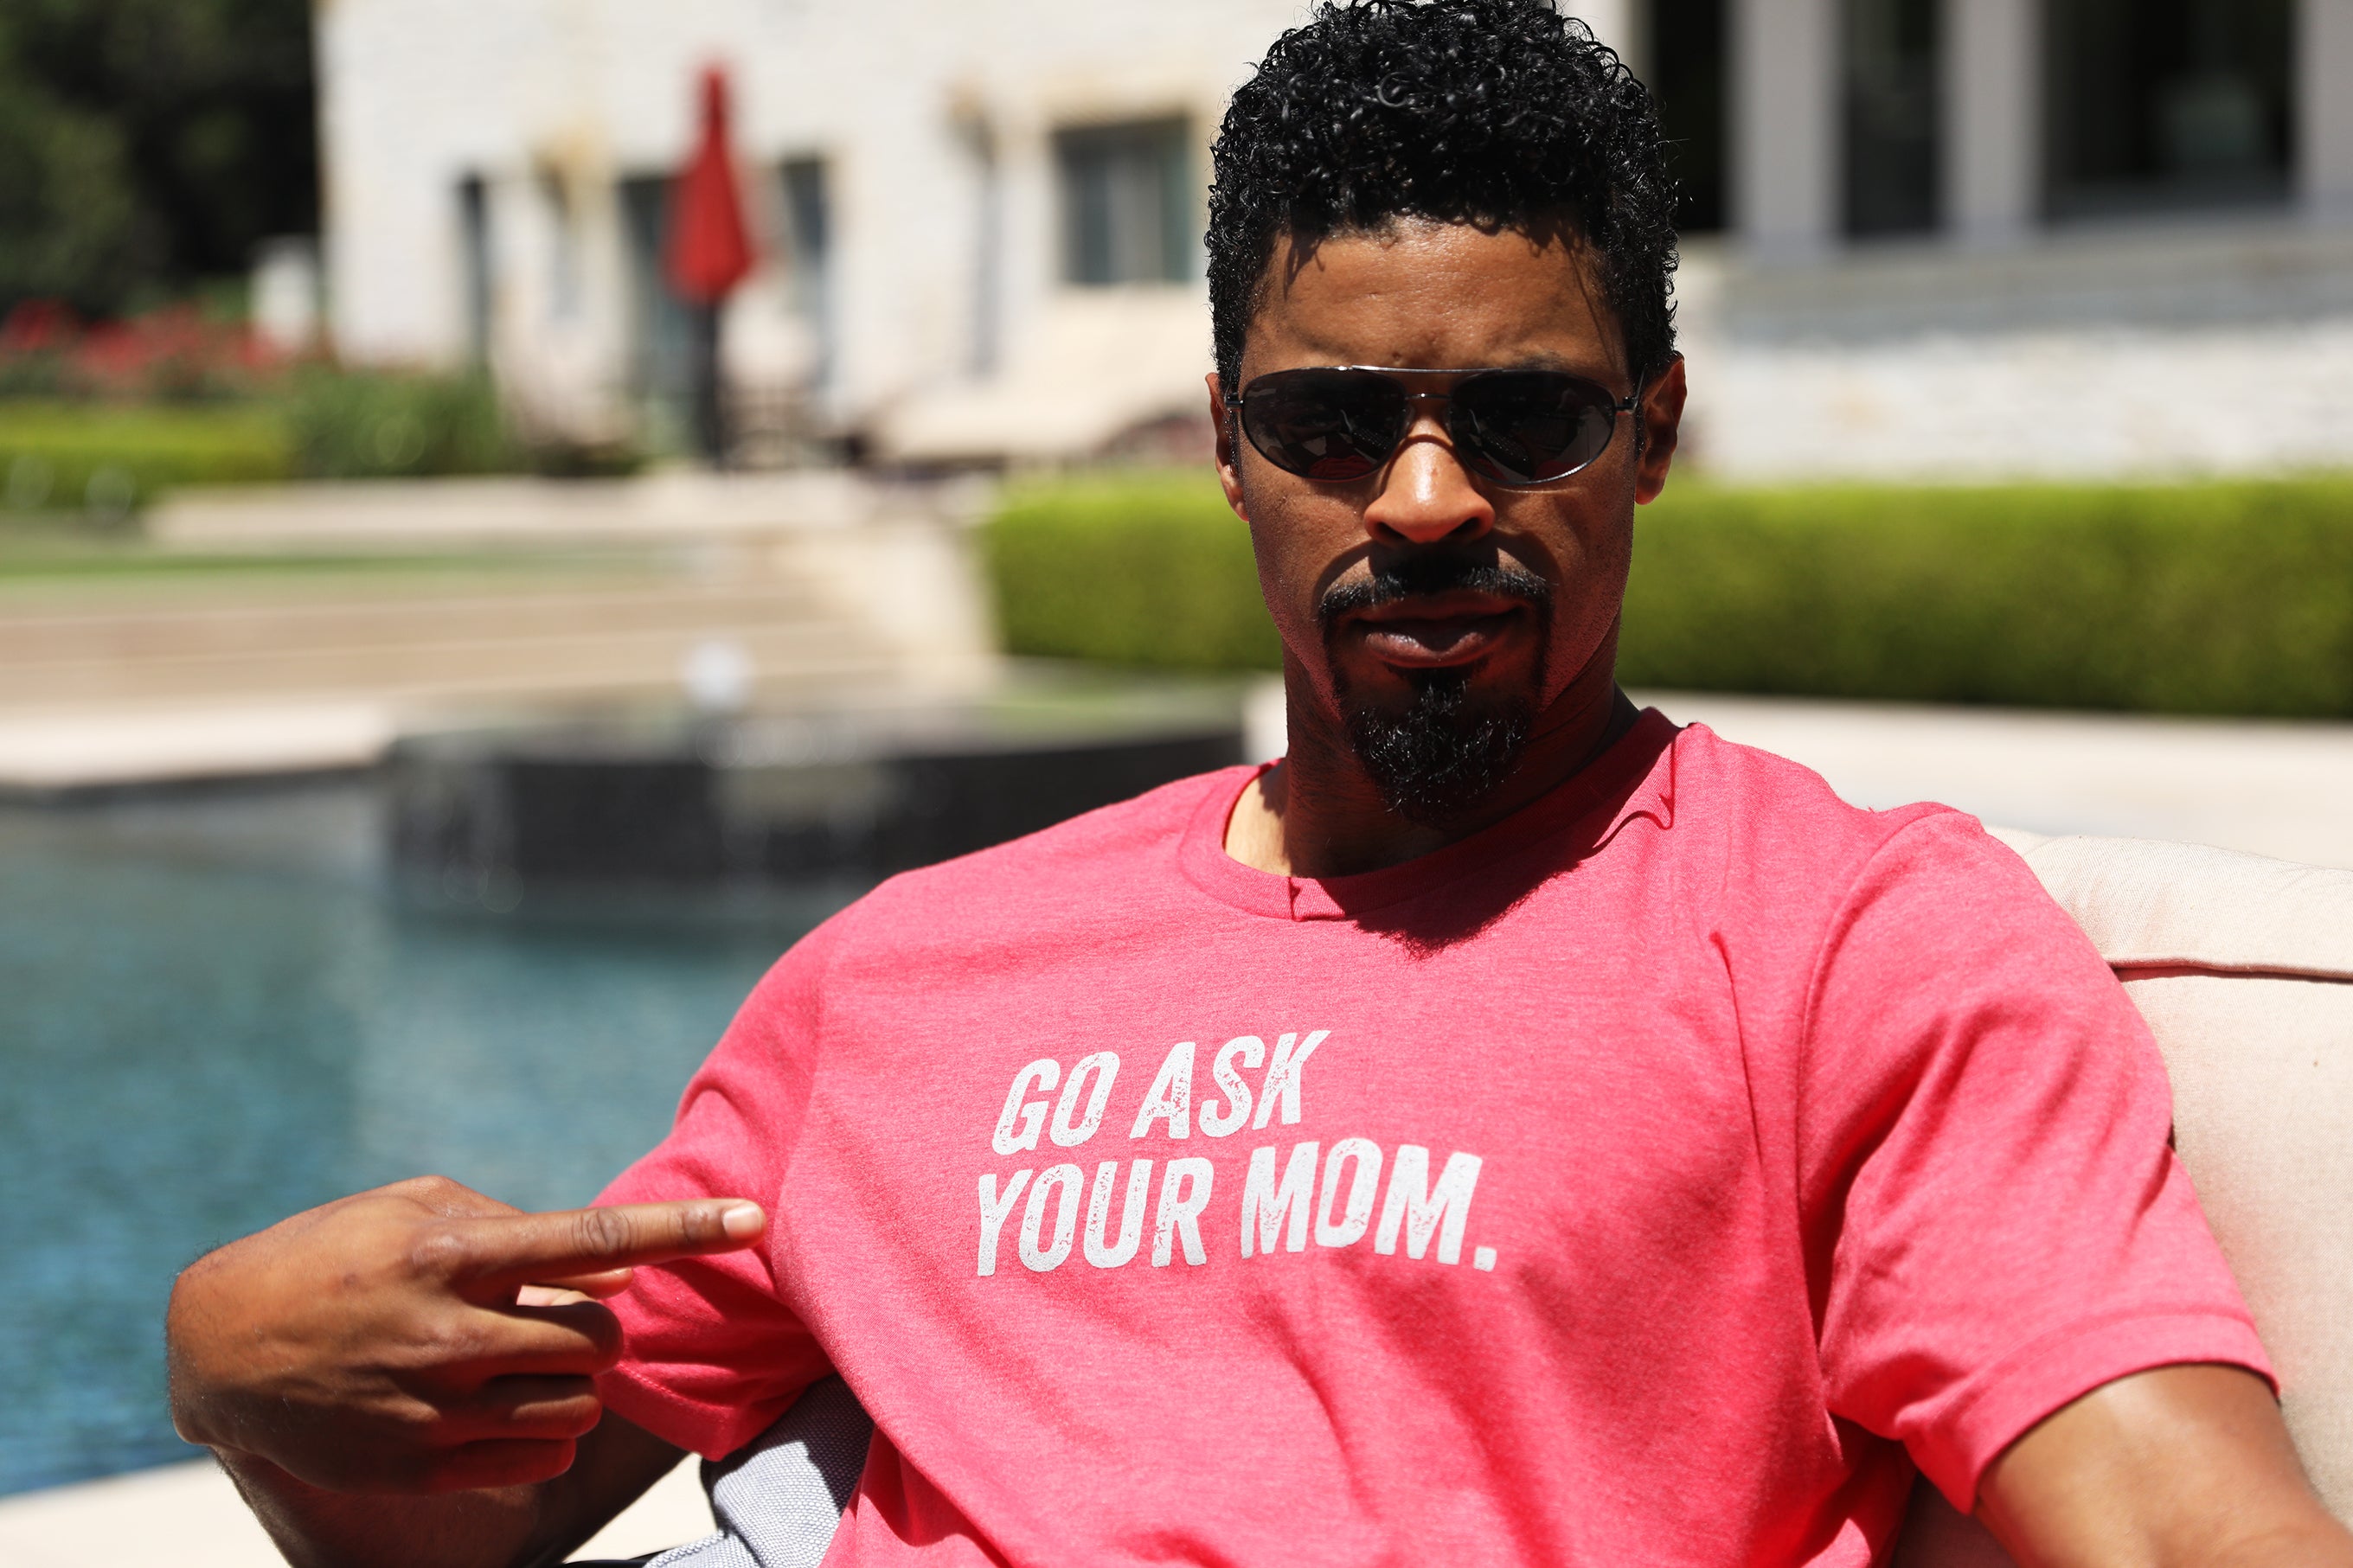 Go Ask Your Mom Tee